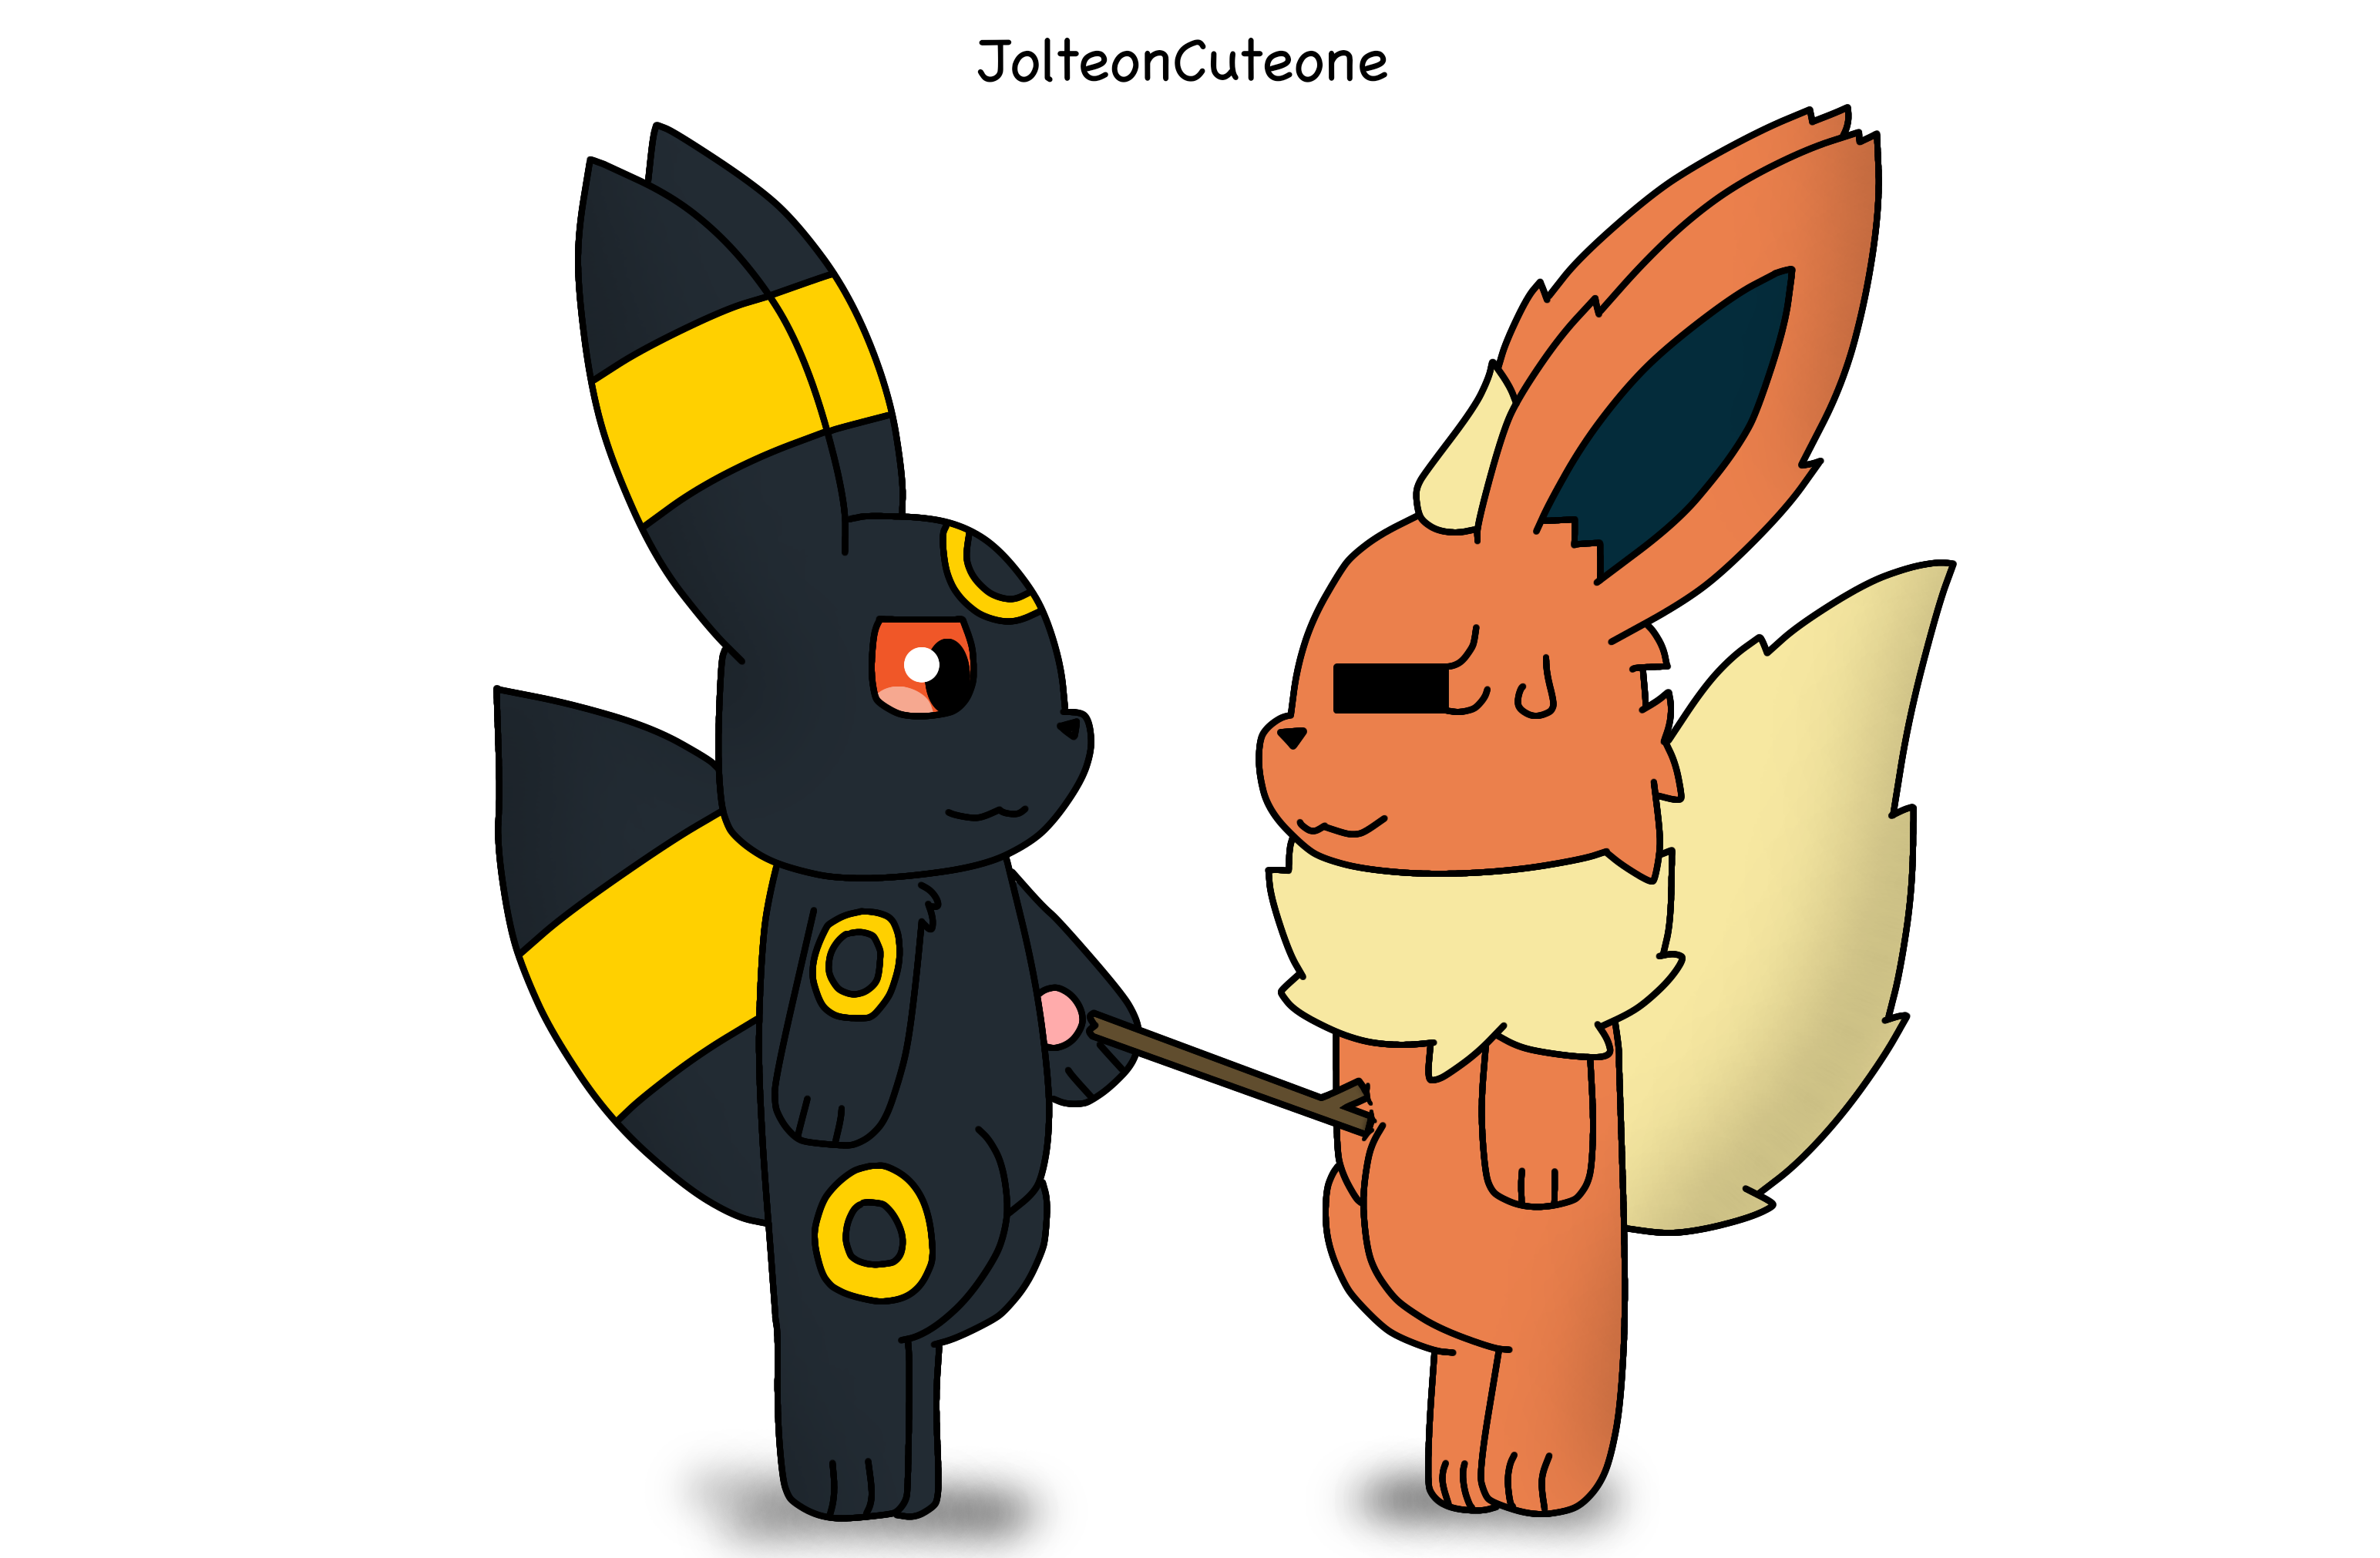 Umbreon and Flareon by Blitza by Eevee-Evolution-Club on DeviantArt